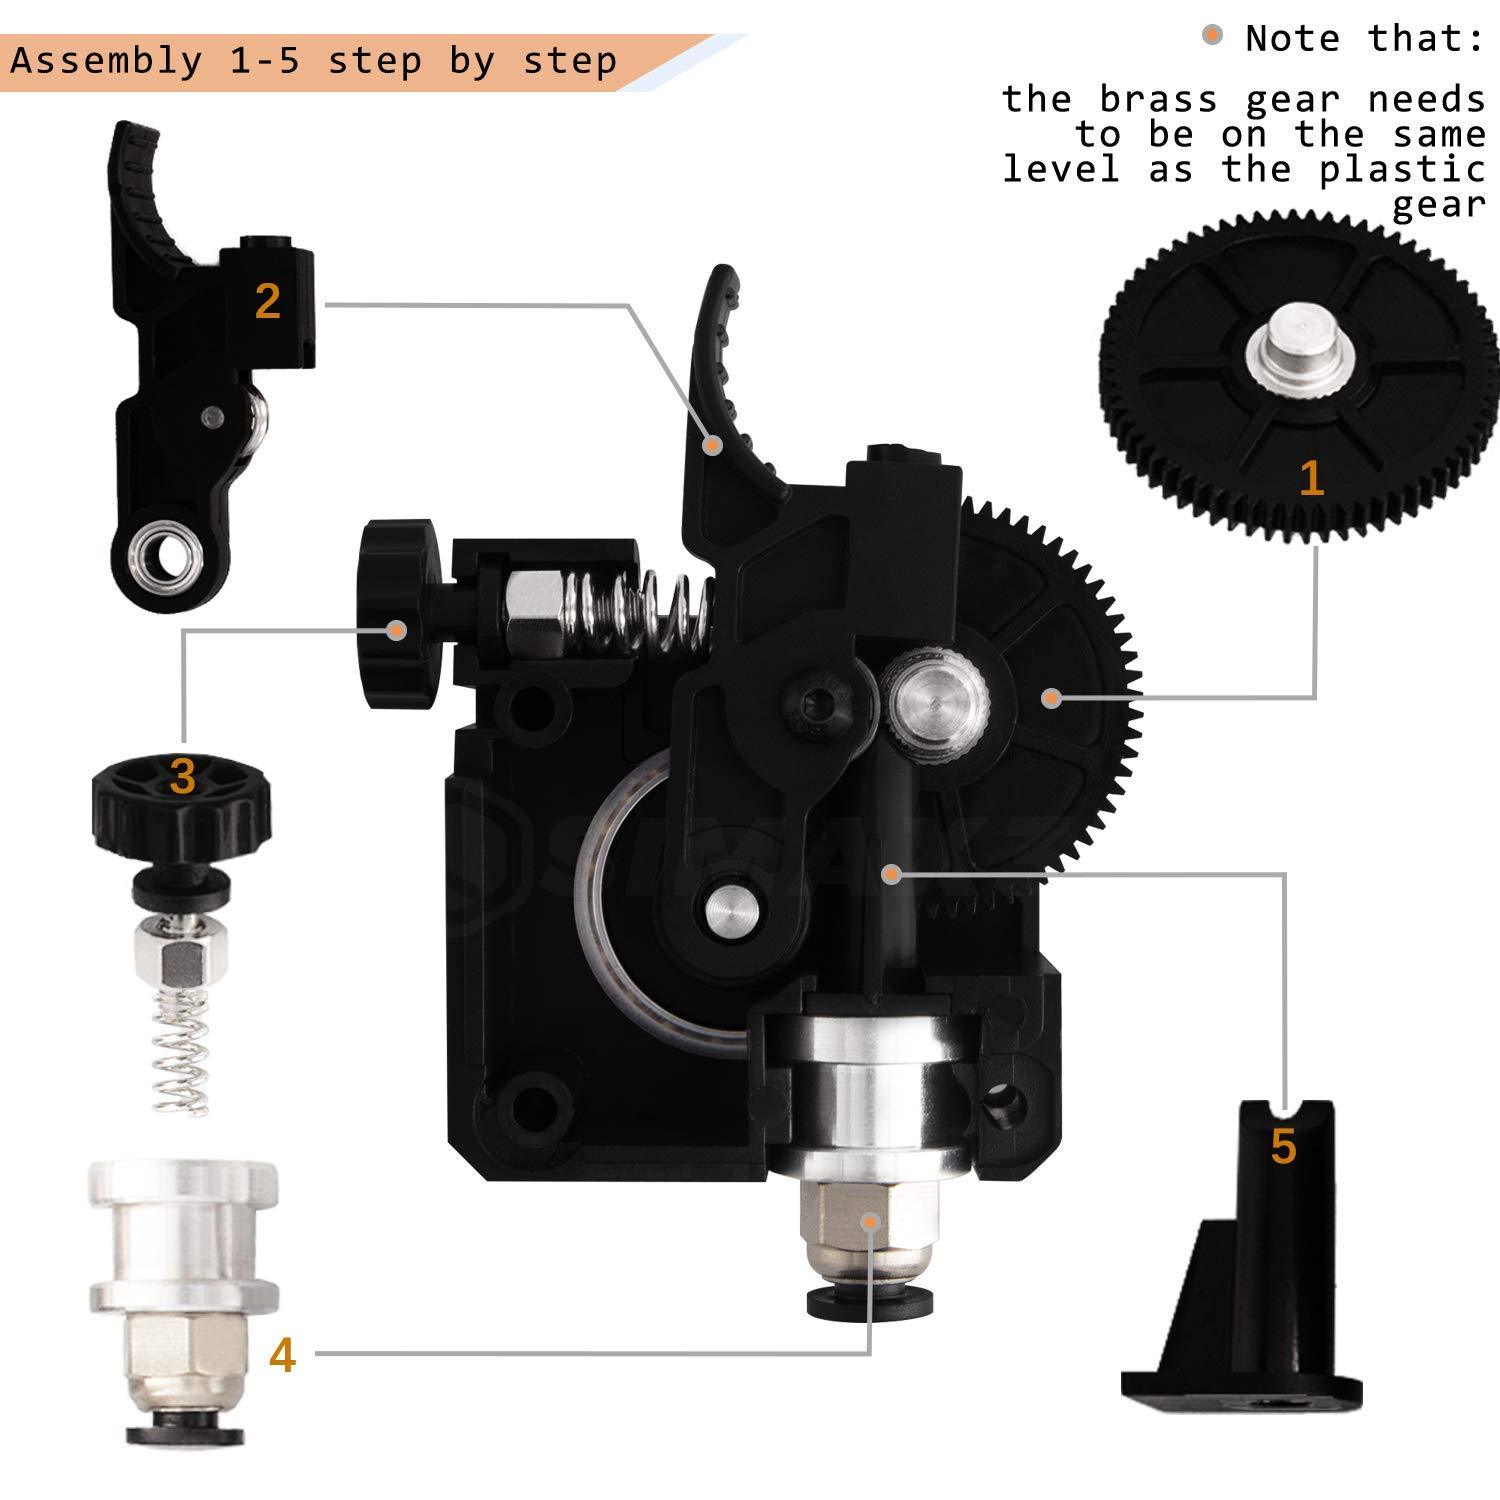 Titan Extruder Compatible with CR10, Ender 3 Series 3D Printers